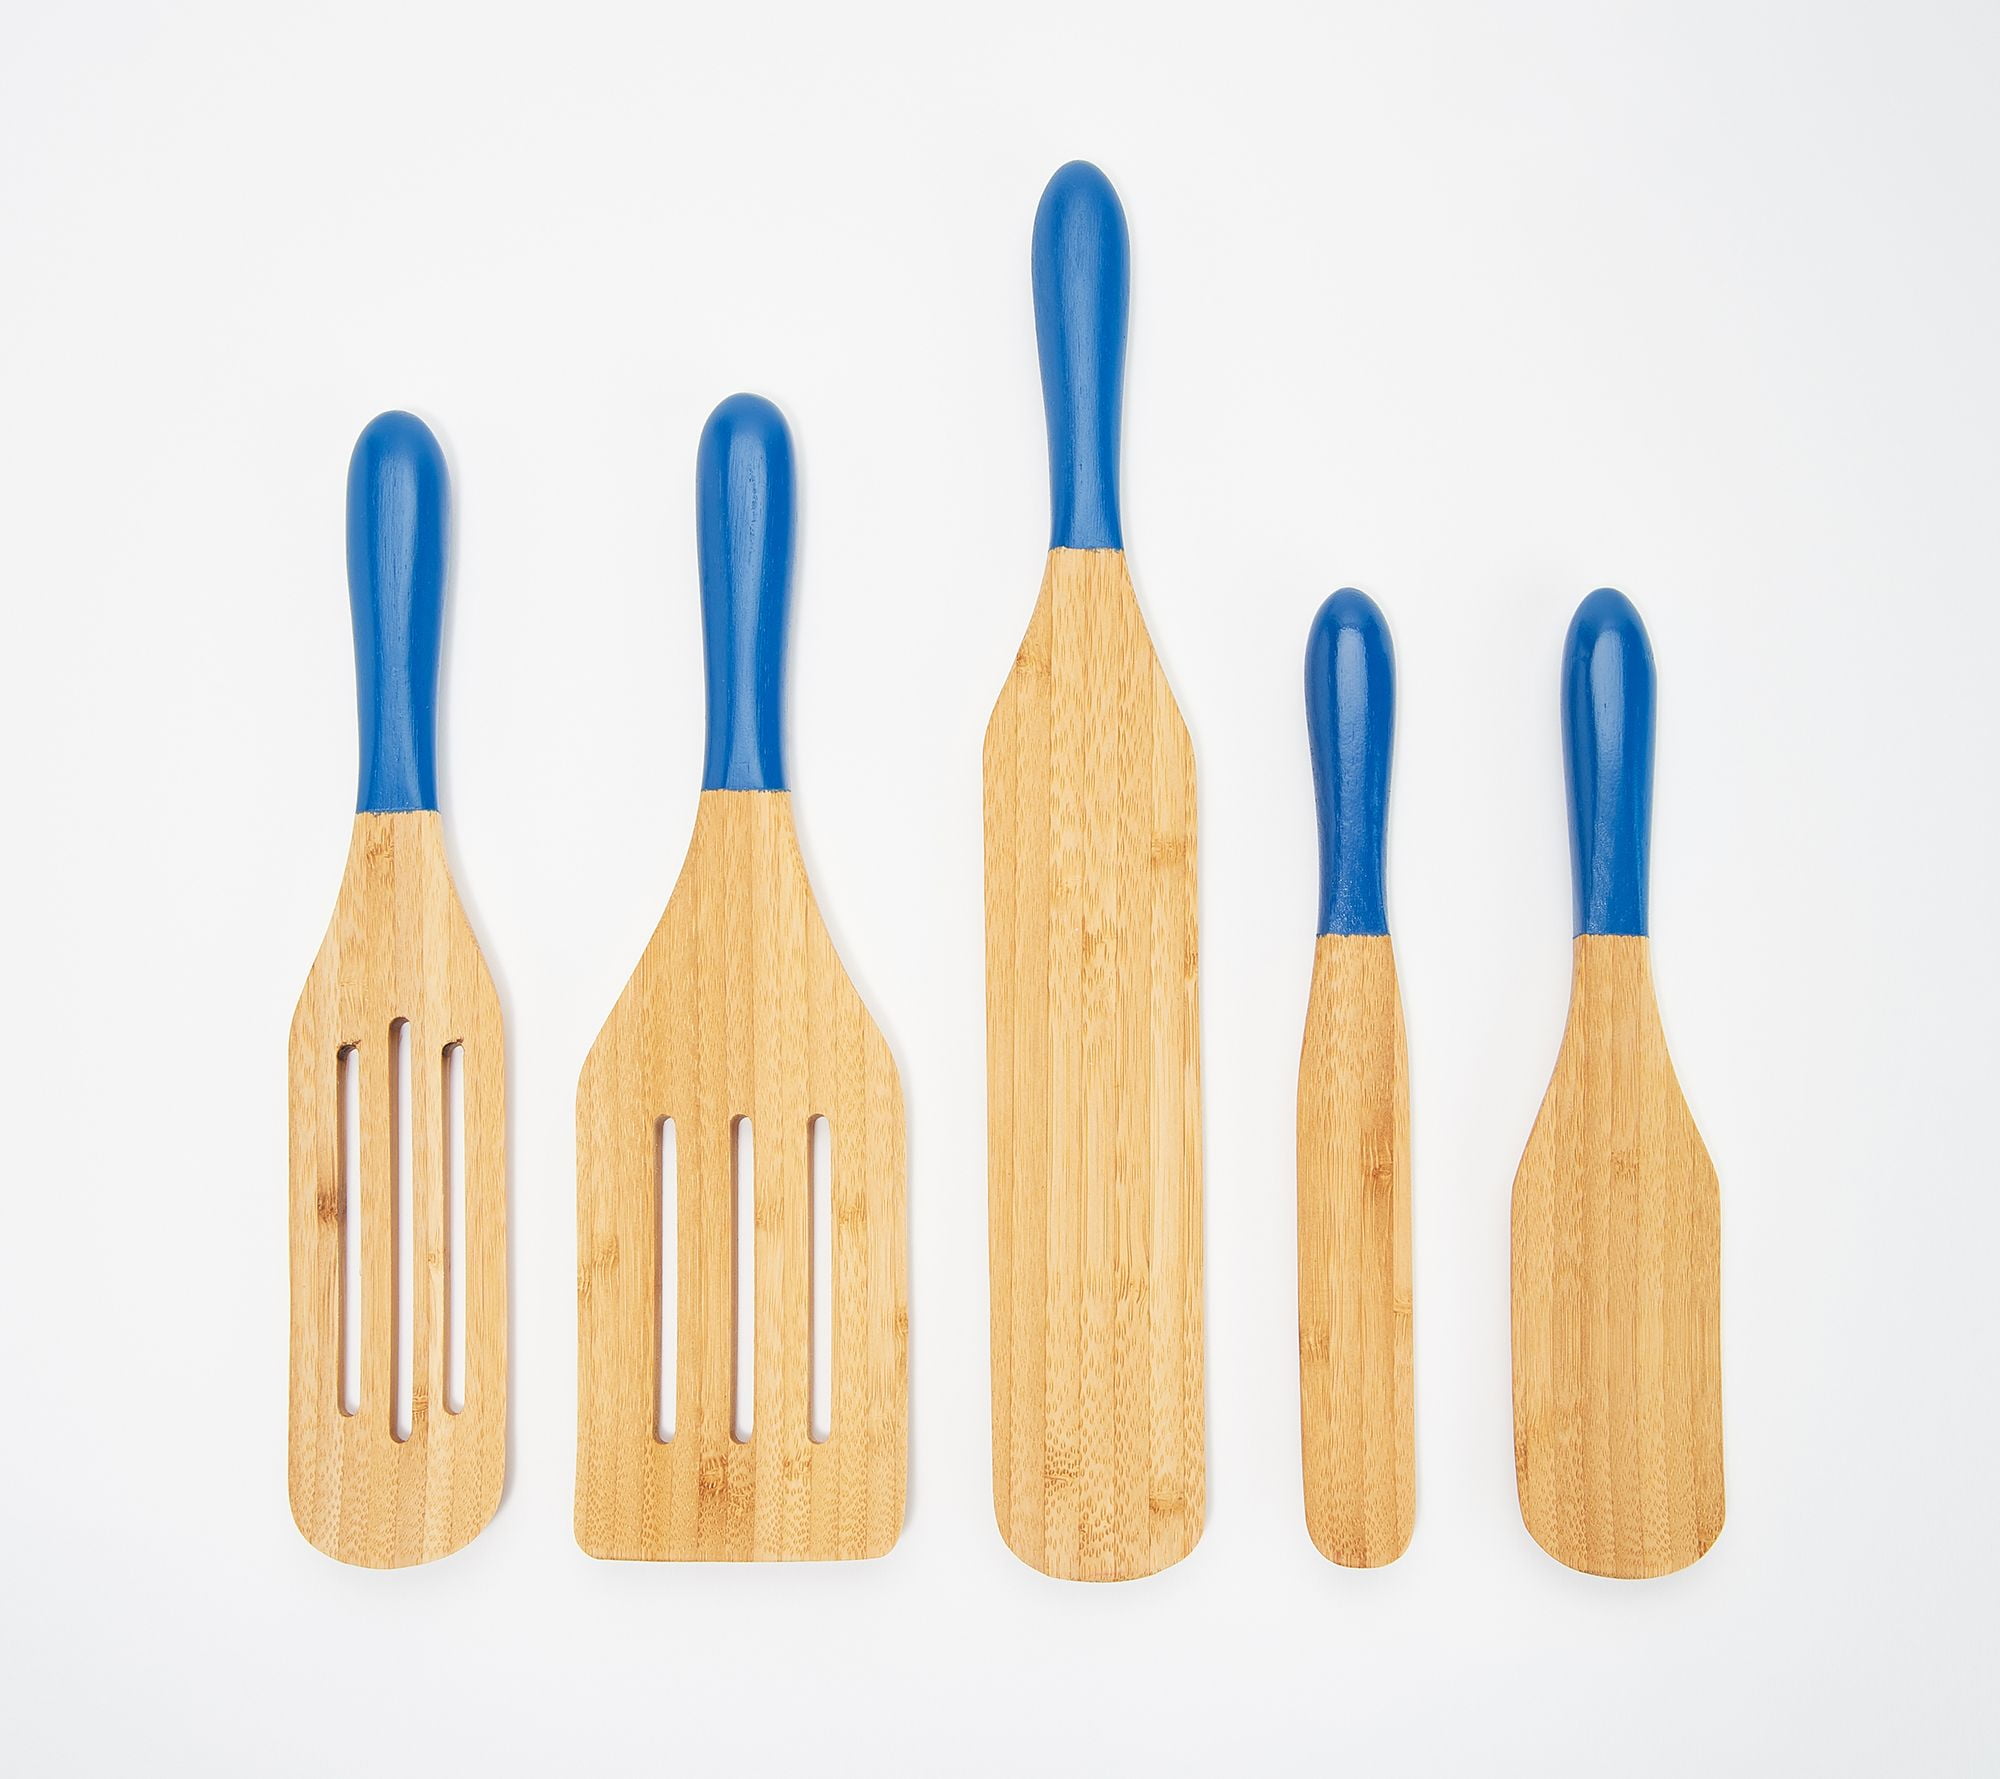 Mad Hungry 2 Piece Super Spoon & Large Spurtle Spoon Set 